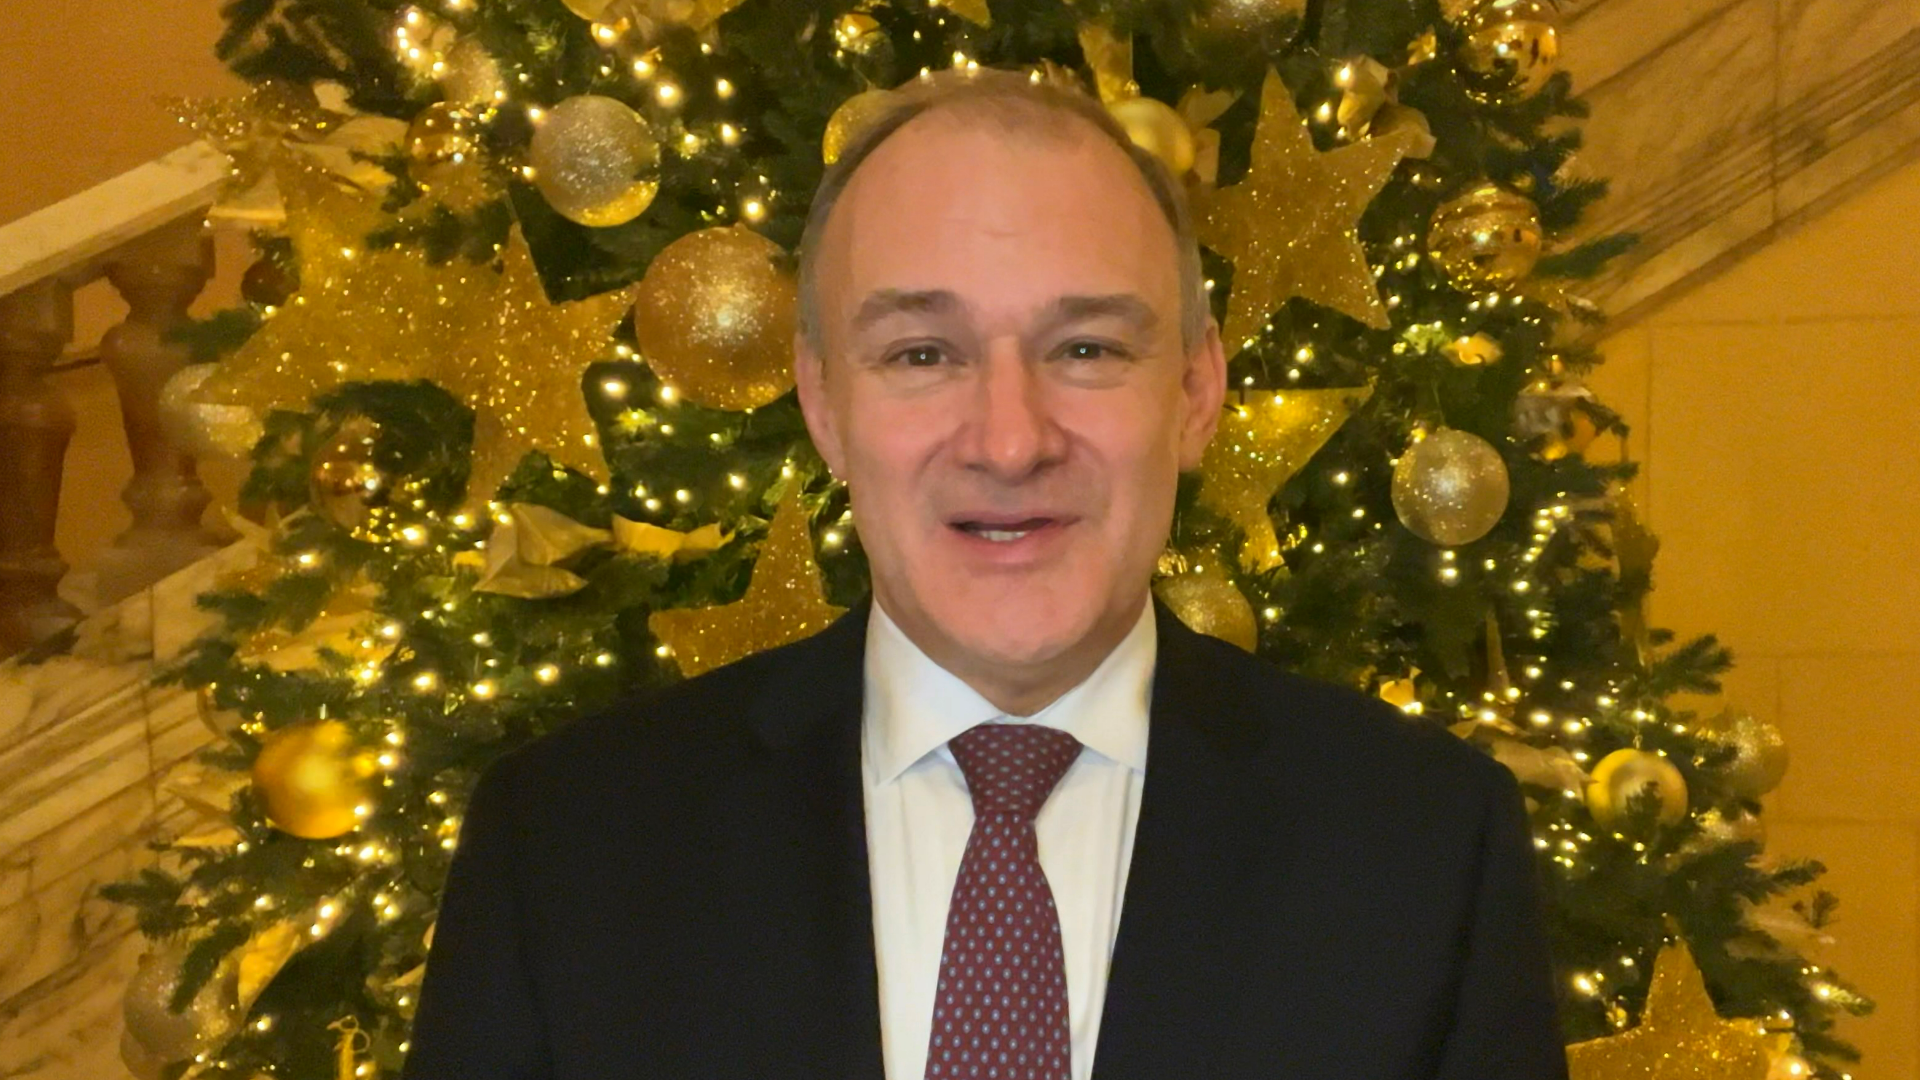 Ed Davey standing in front of a Christmas tree